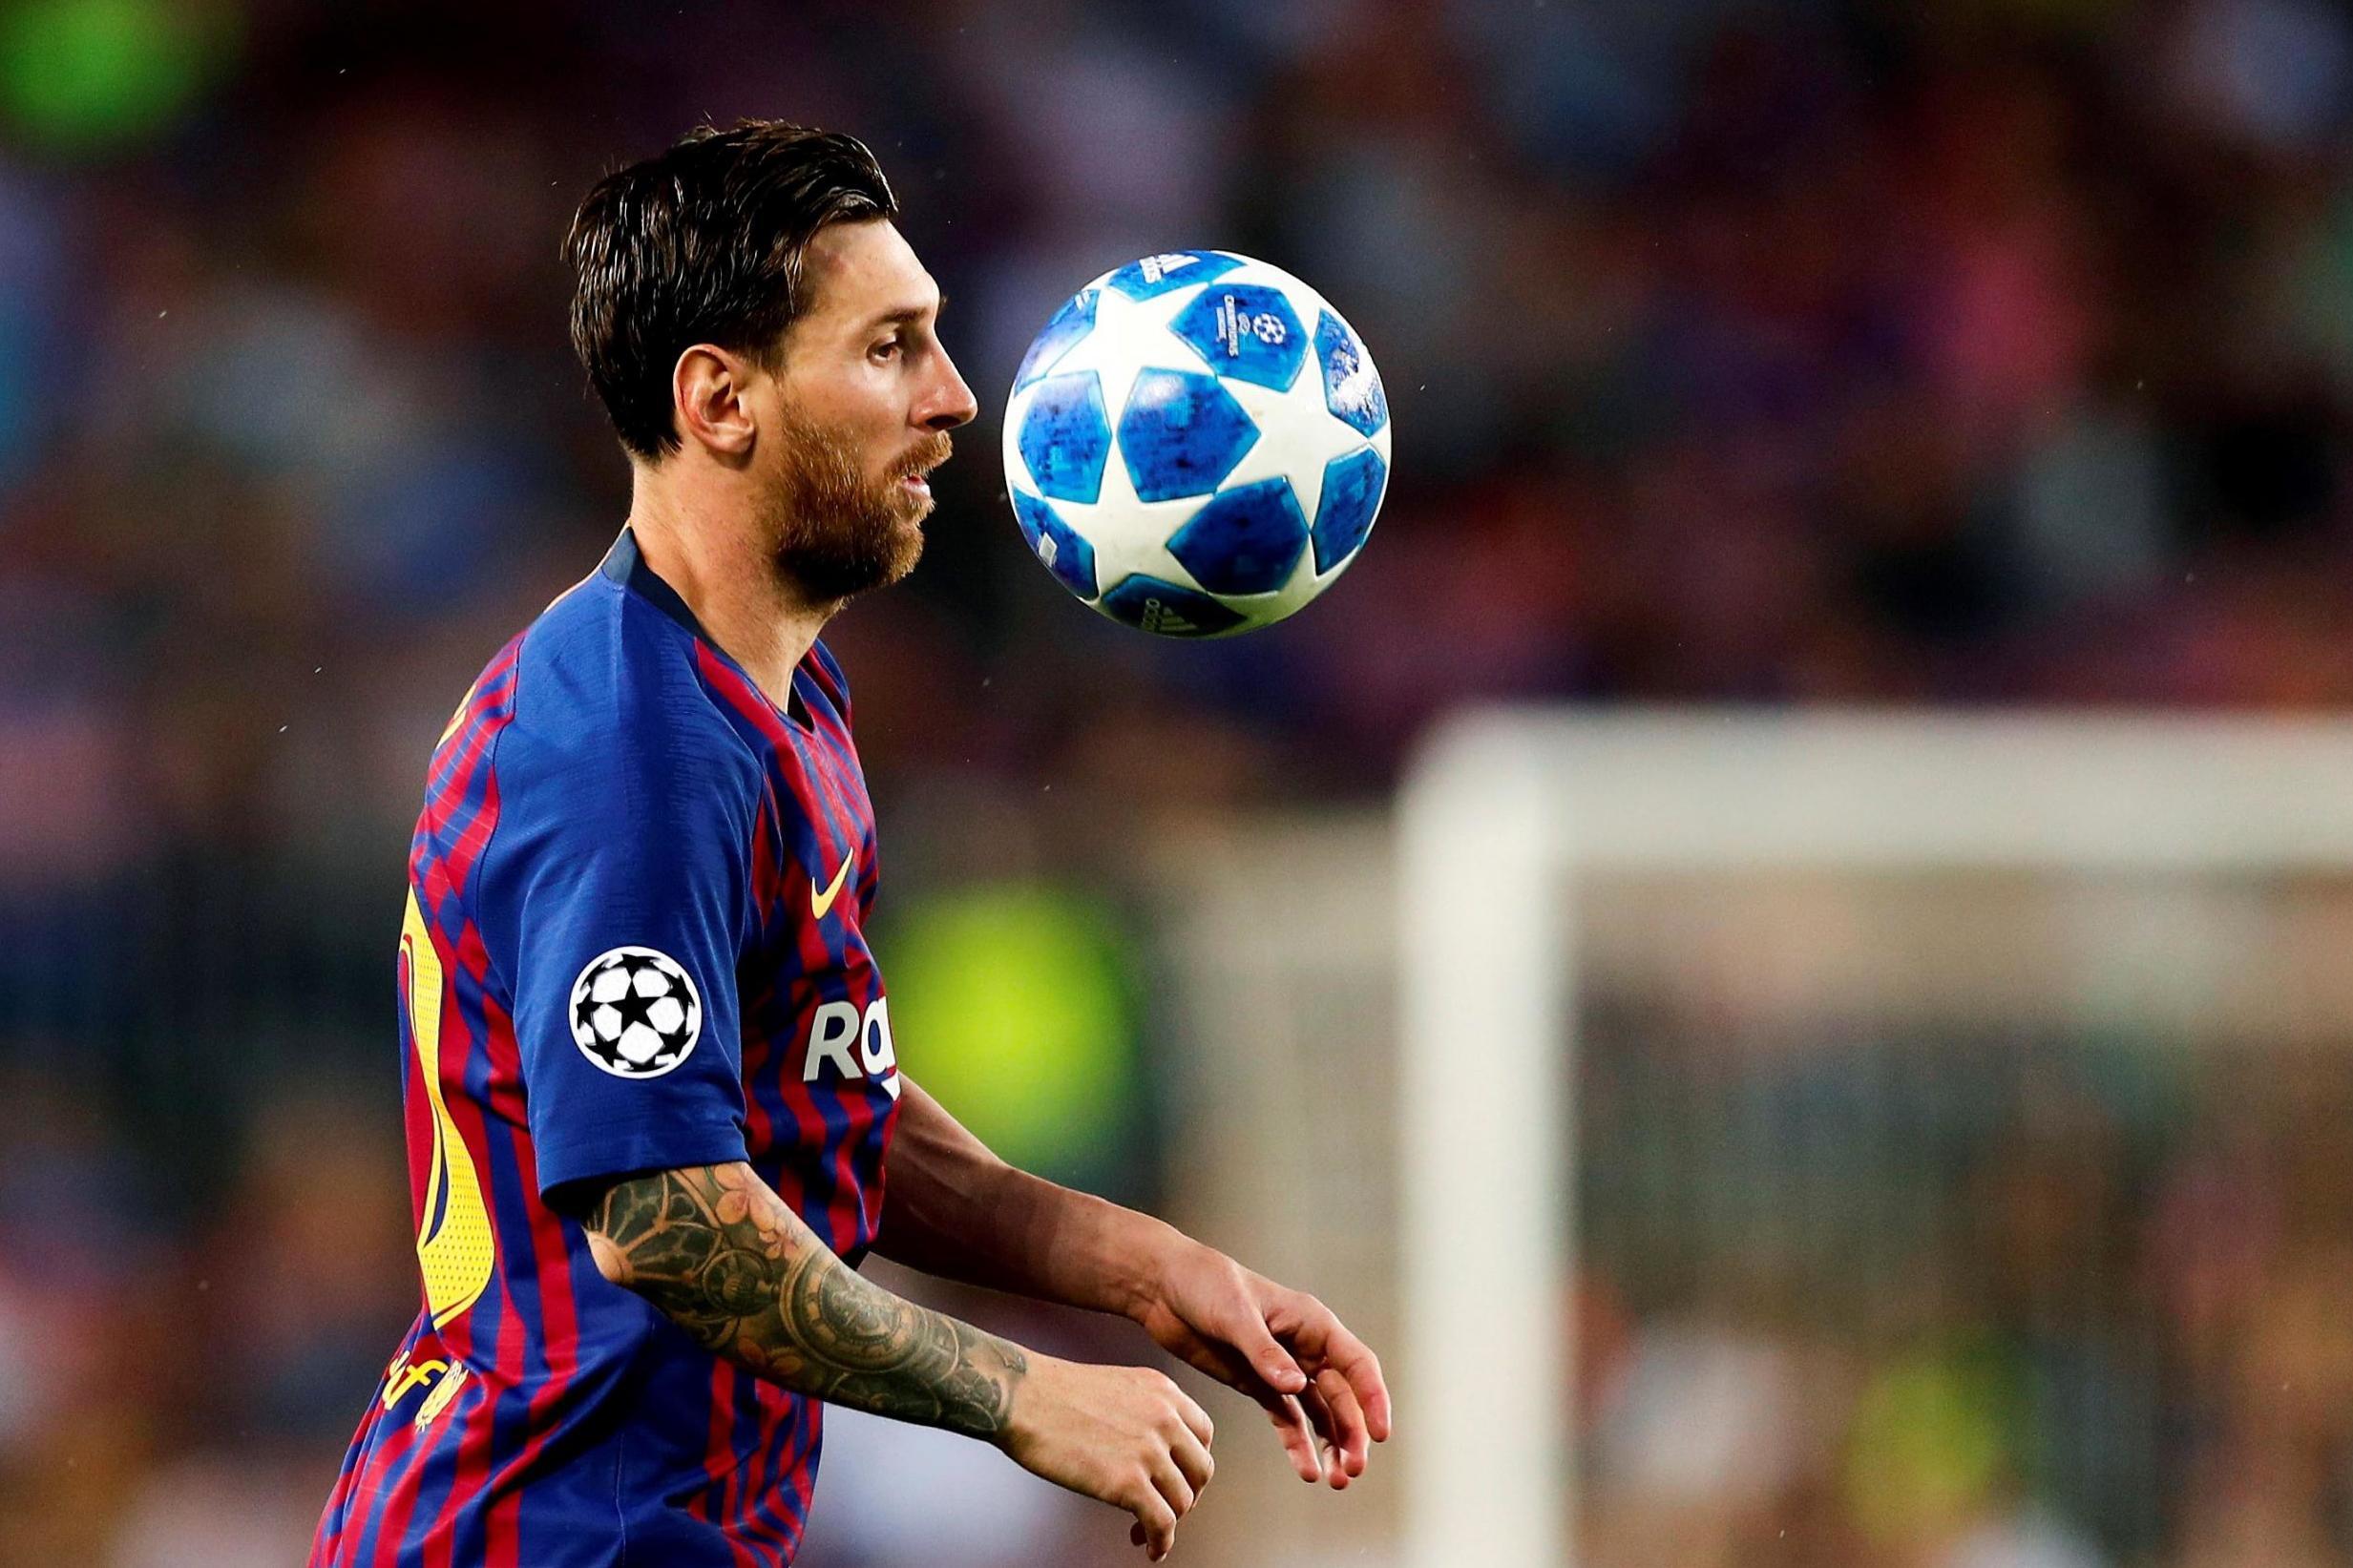 Lionel Messi HD Wallpaper 2019 For Pc, Android & iPhone